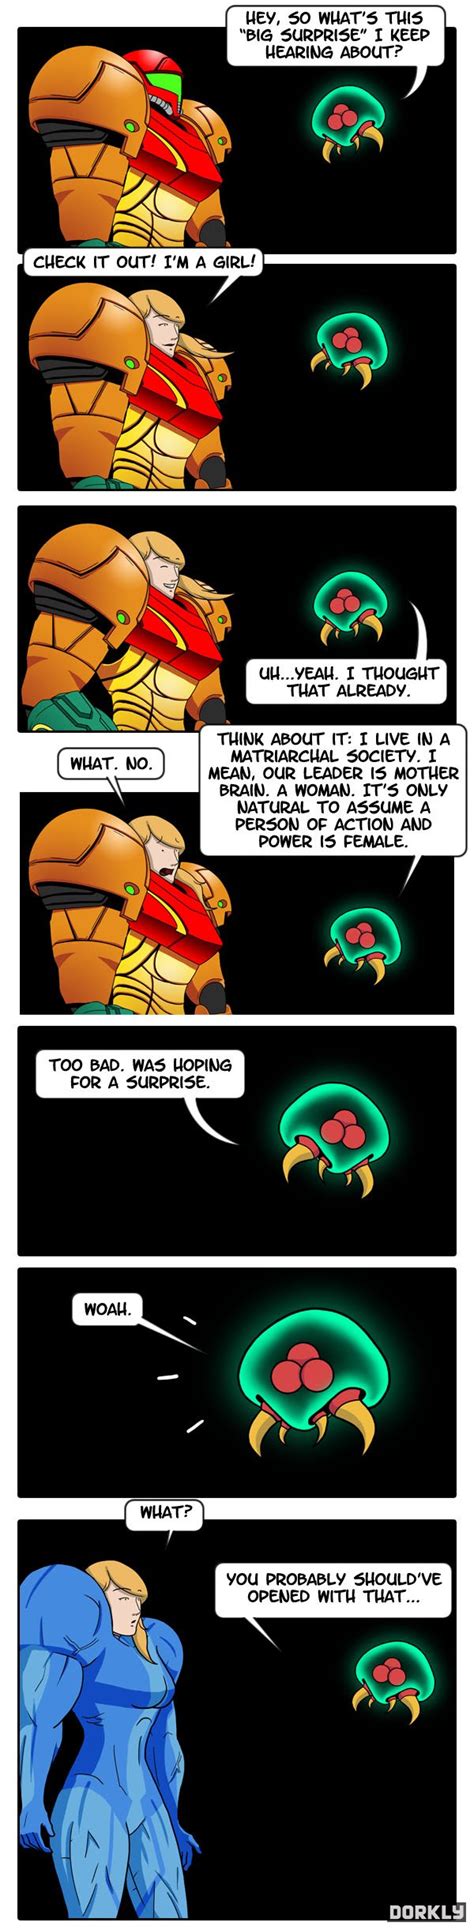 metroid funny pictures and best jokes comics images video humor animation i lol d